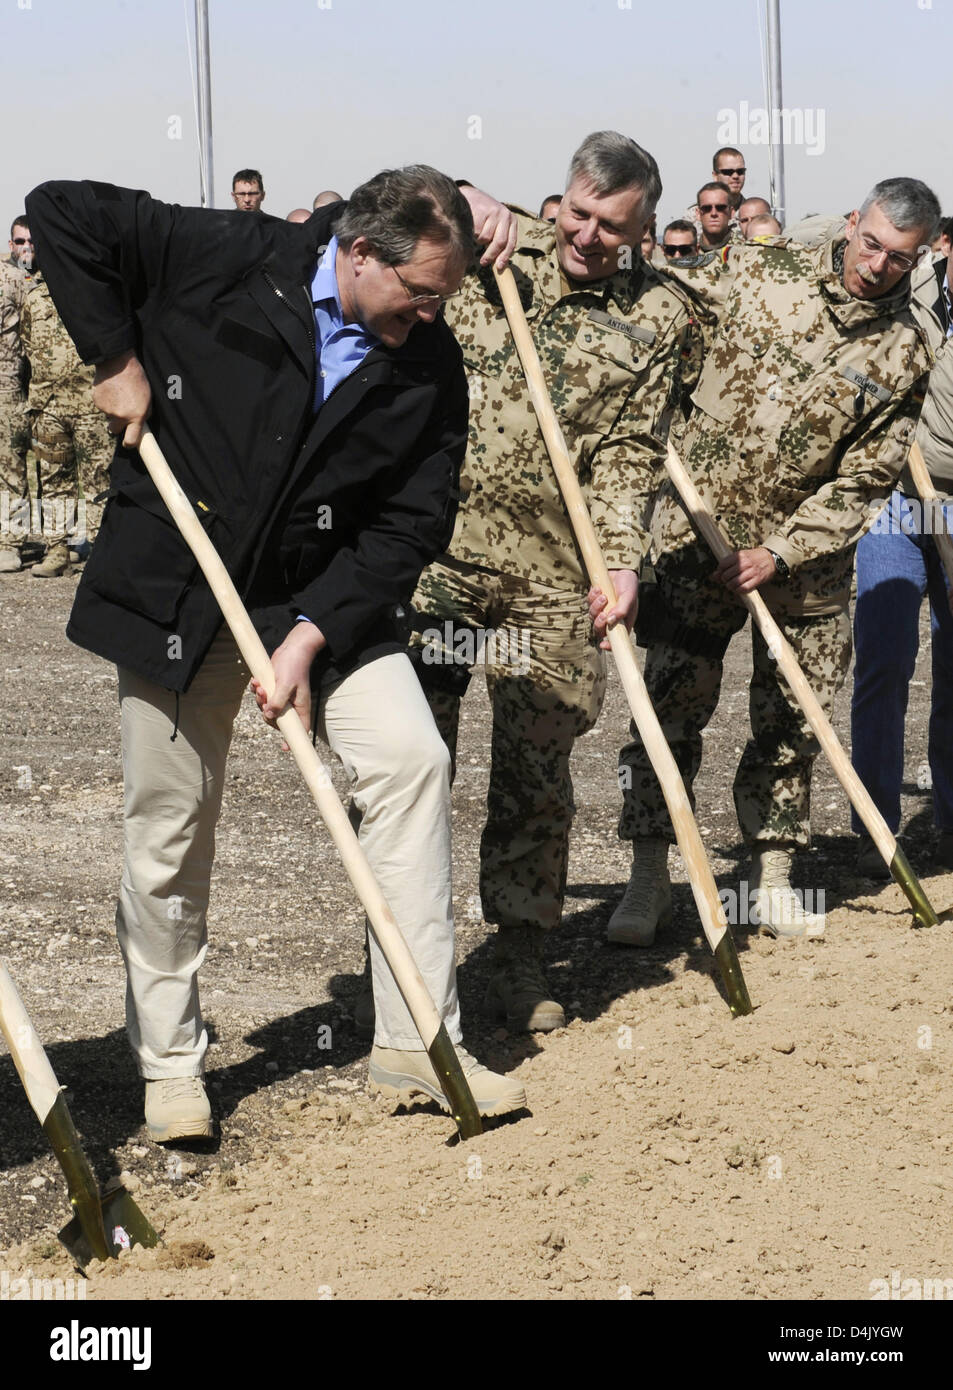 (L-R) German Defence Minister Franz Josef Jung, the assistant chief of staff at the ISAF headquarters, General Hans-Erich Antoni, and ISAF Commander North, General Joerg Vollmer perform the ground breaking ceremony for the new runway at the airport in Masar-i-Scharif, Afghanistan, 10 March 2009. The new runway for the designated air traffic hub will be 3,000m long and 45m wide. Mr  Stock Photo